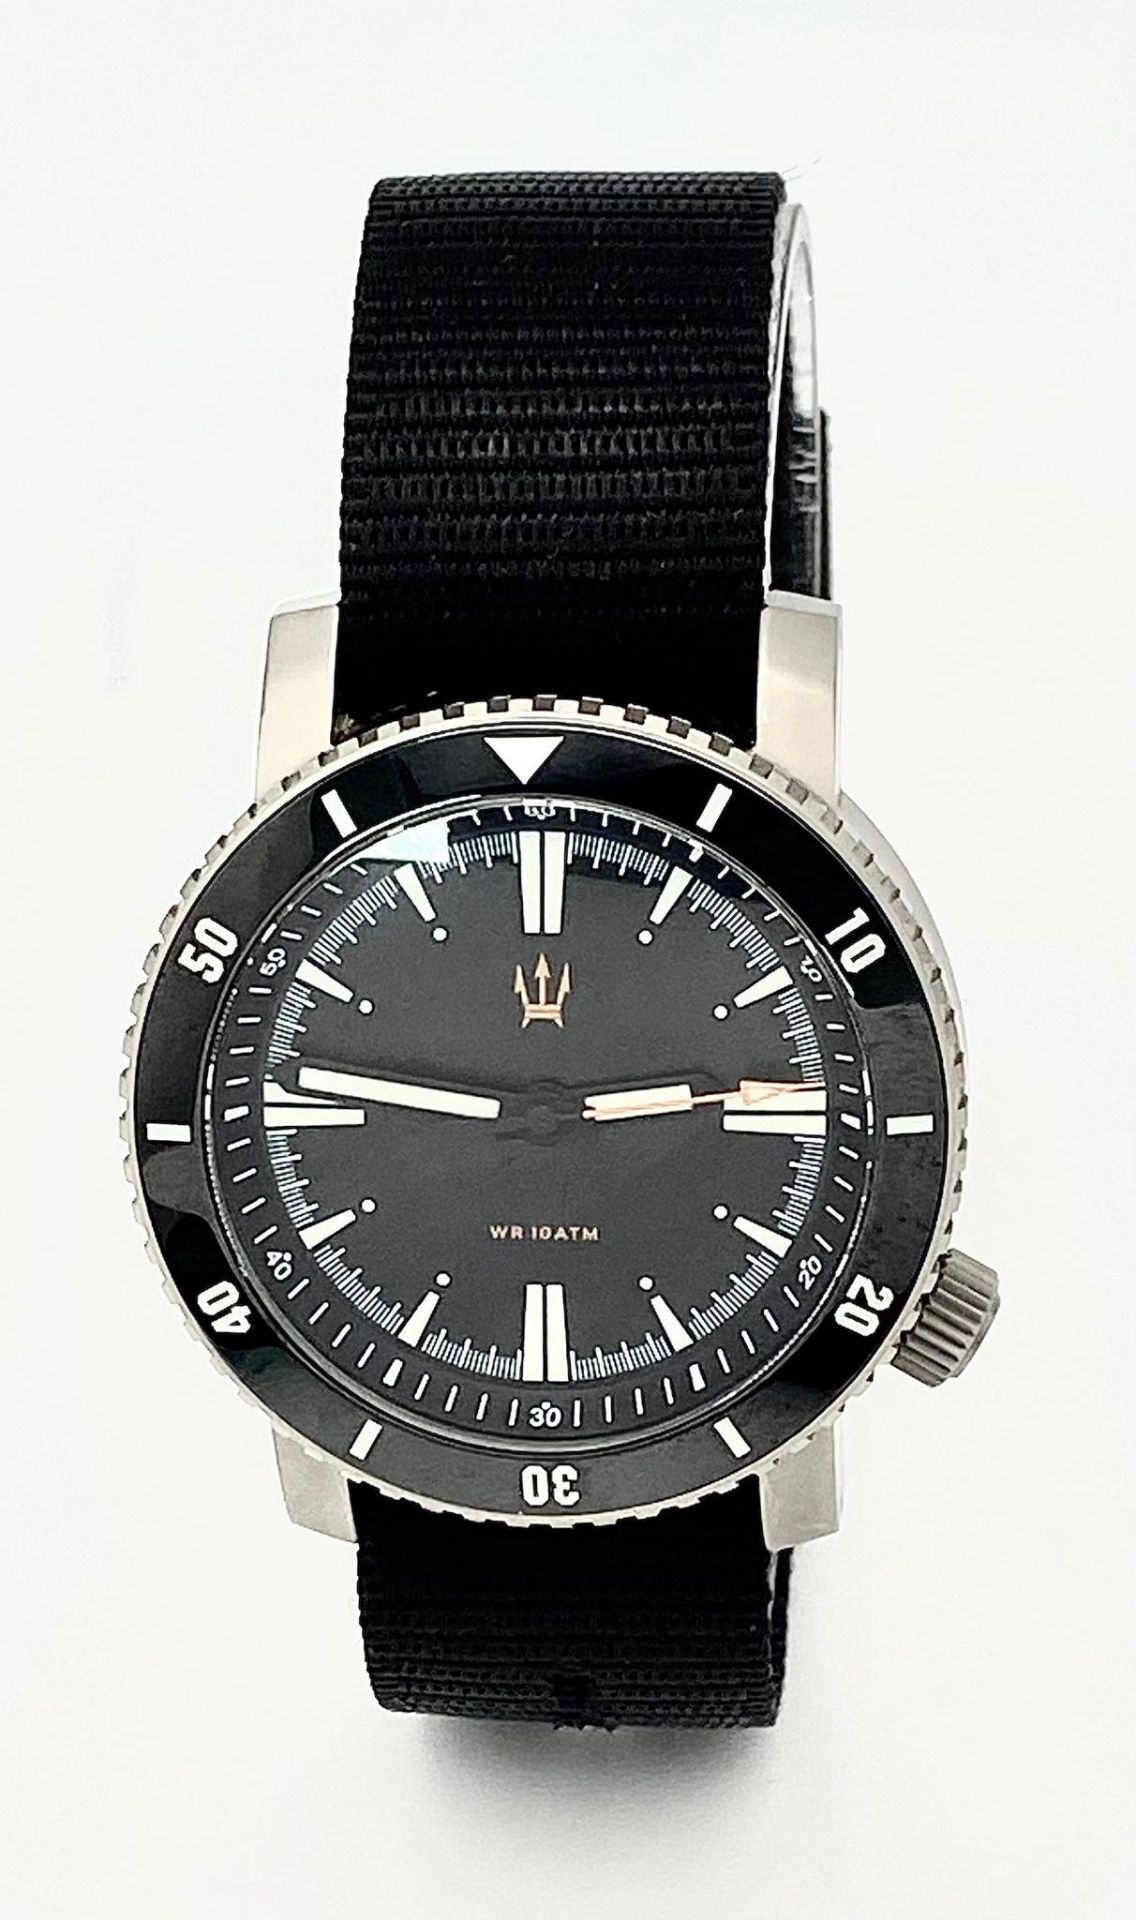 An Excellent Condition, Limited Edition, Military Specification, Automatic Divers Watch by - Image 2 of 7